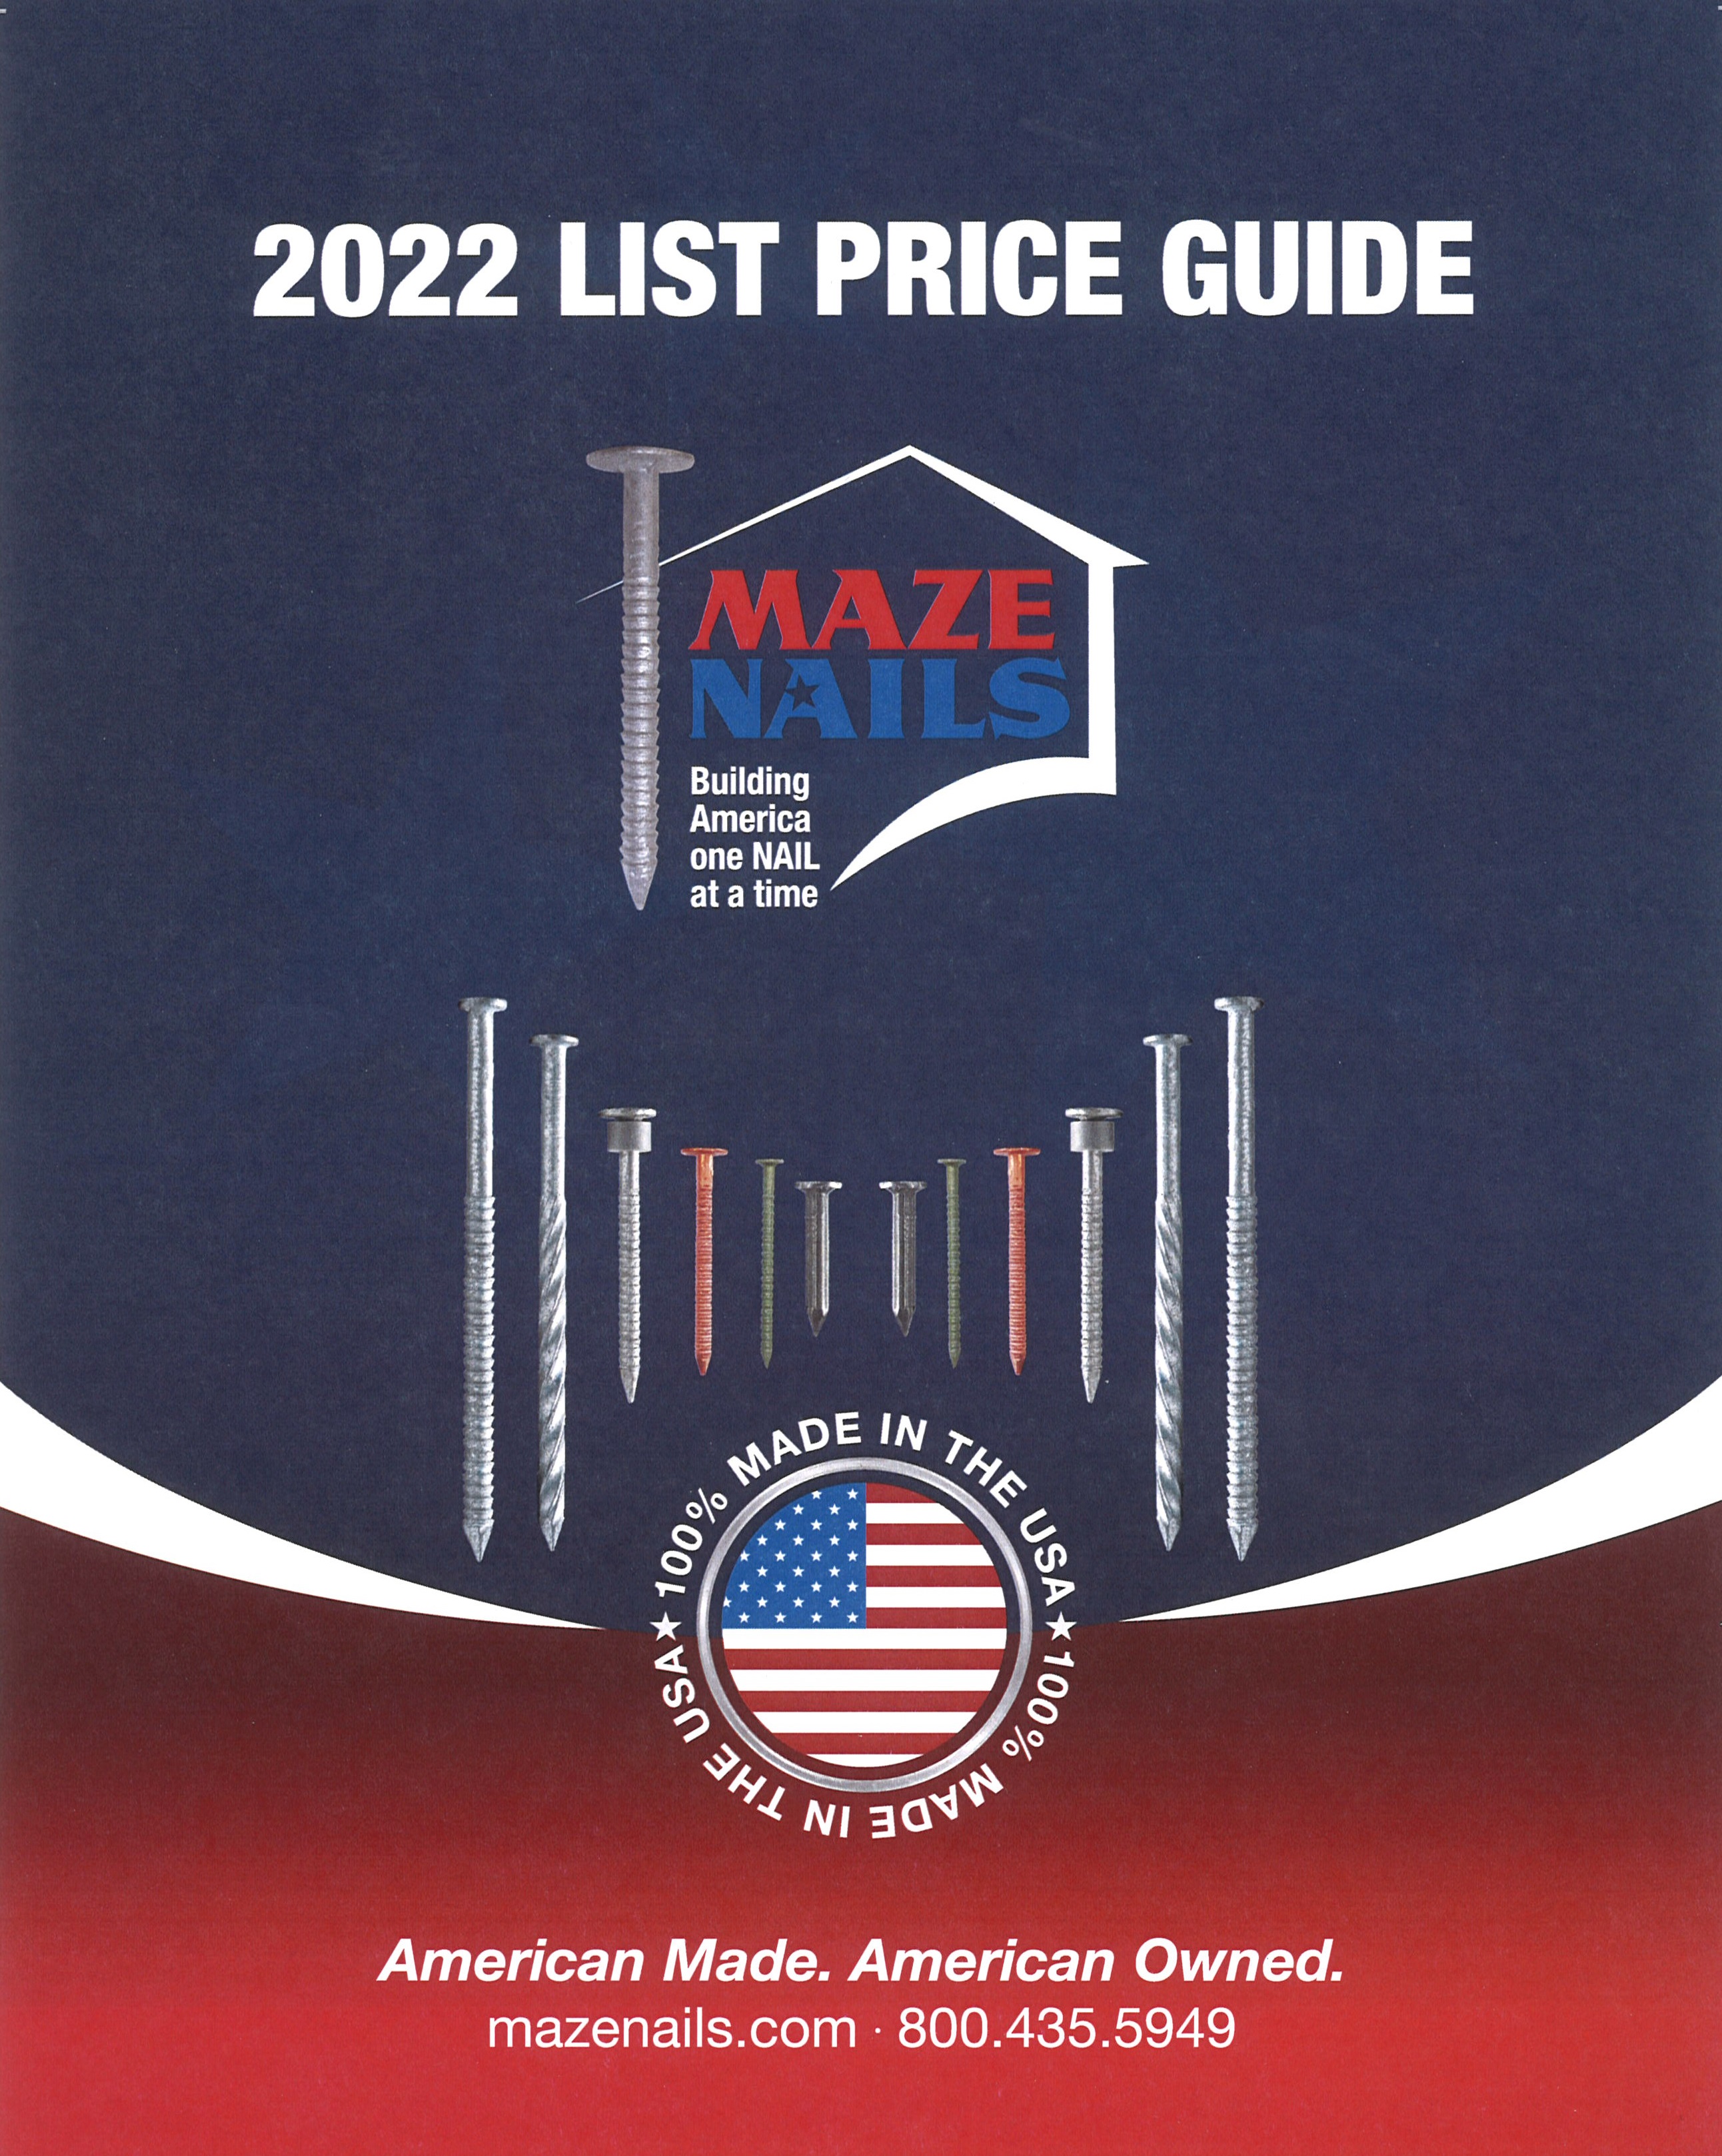 2022 LIST PRICE GUIDE